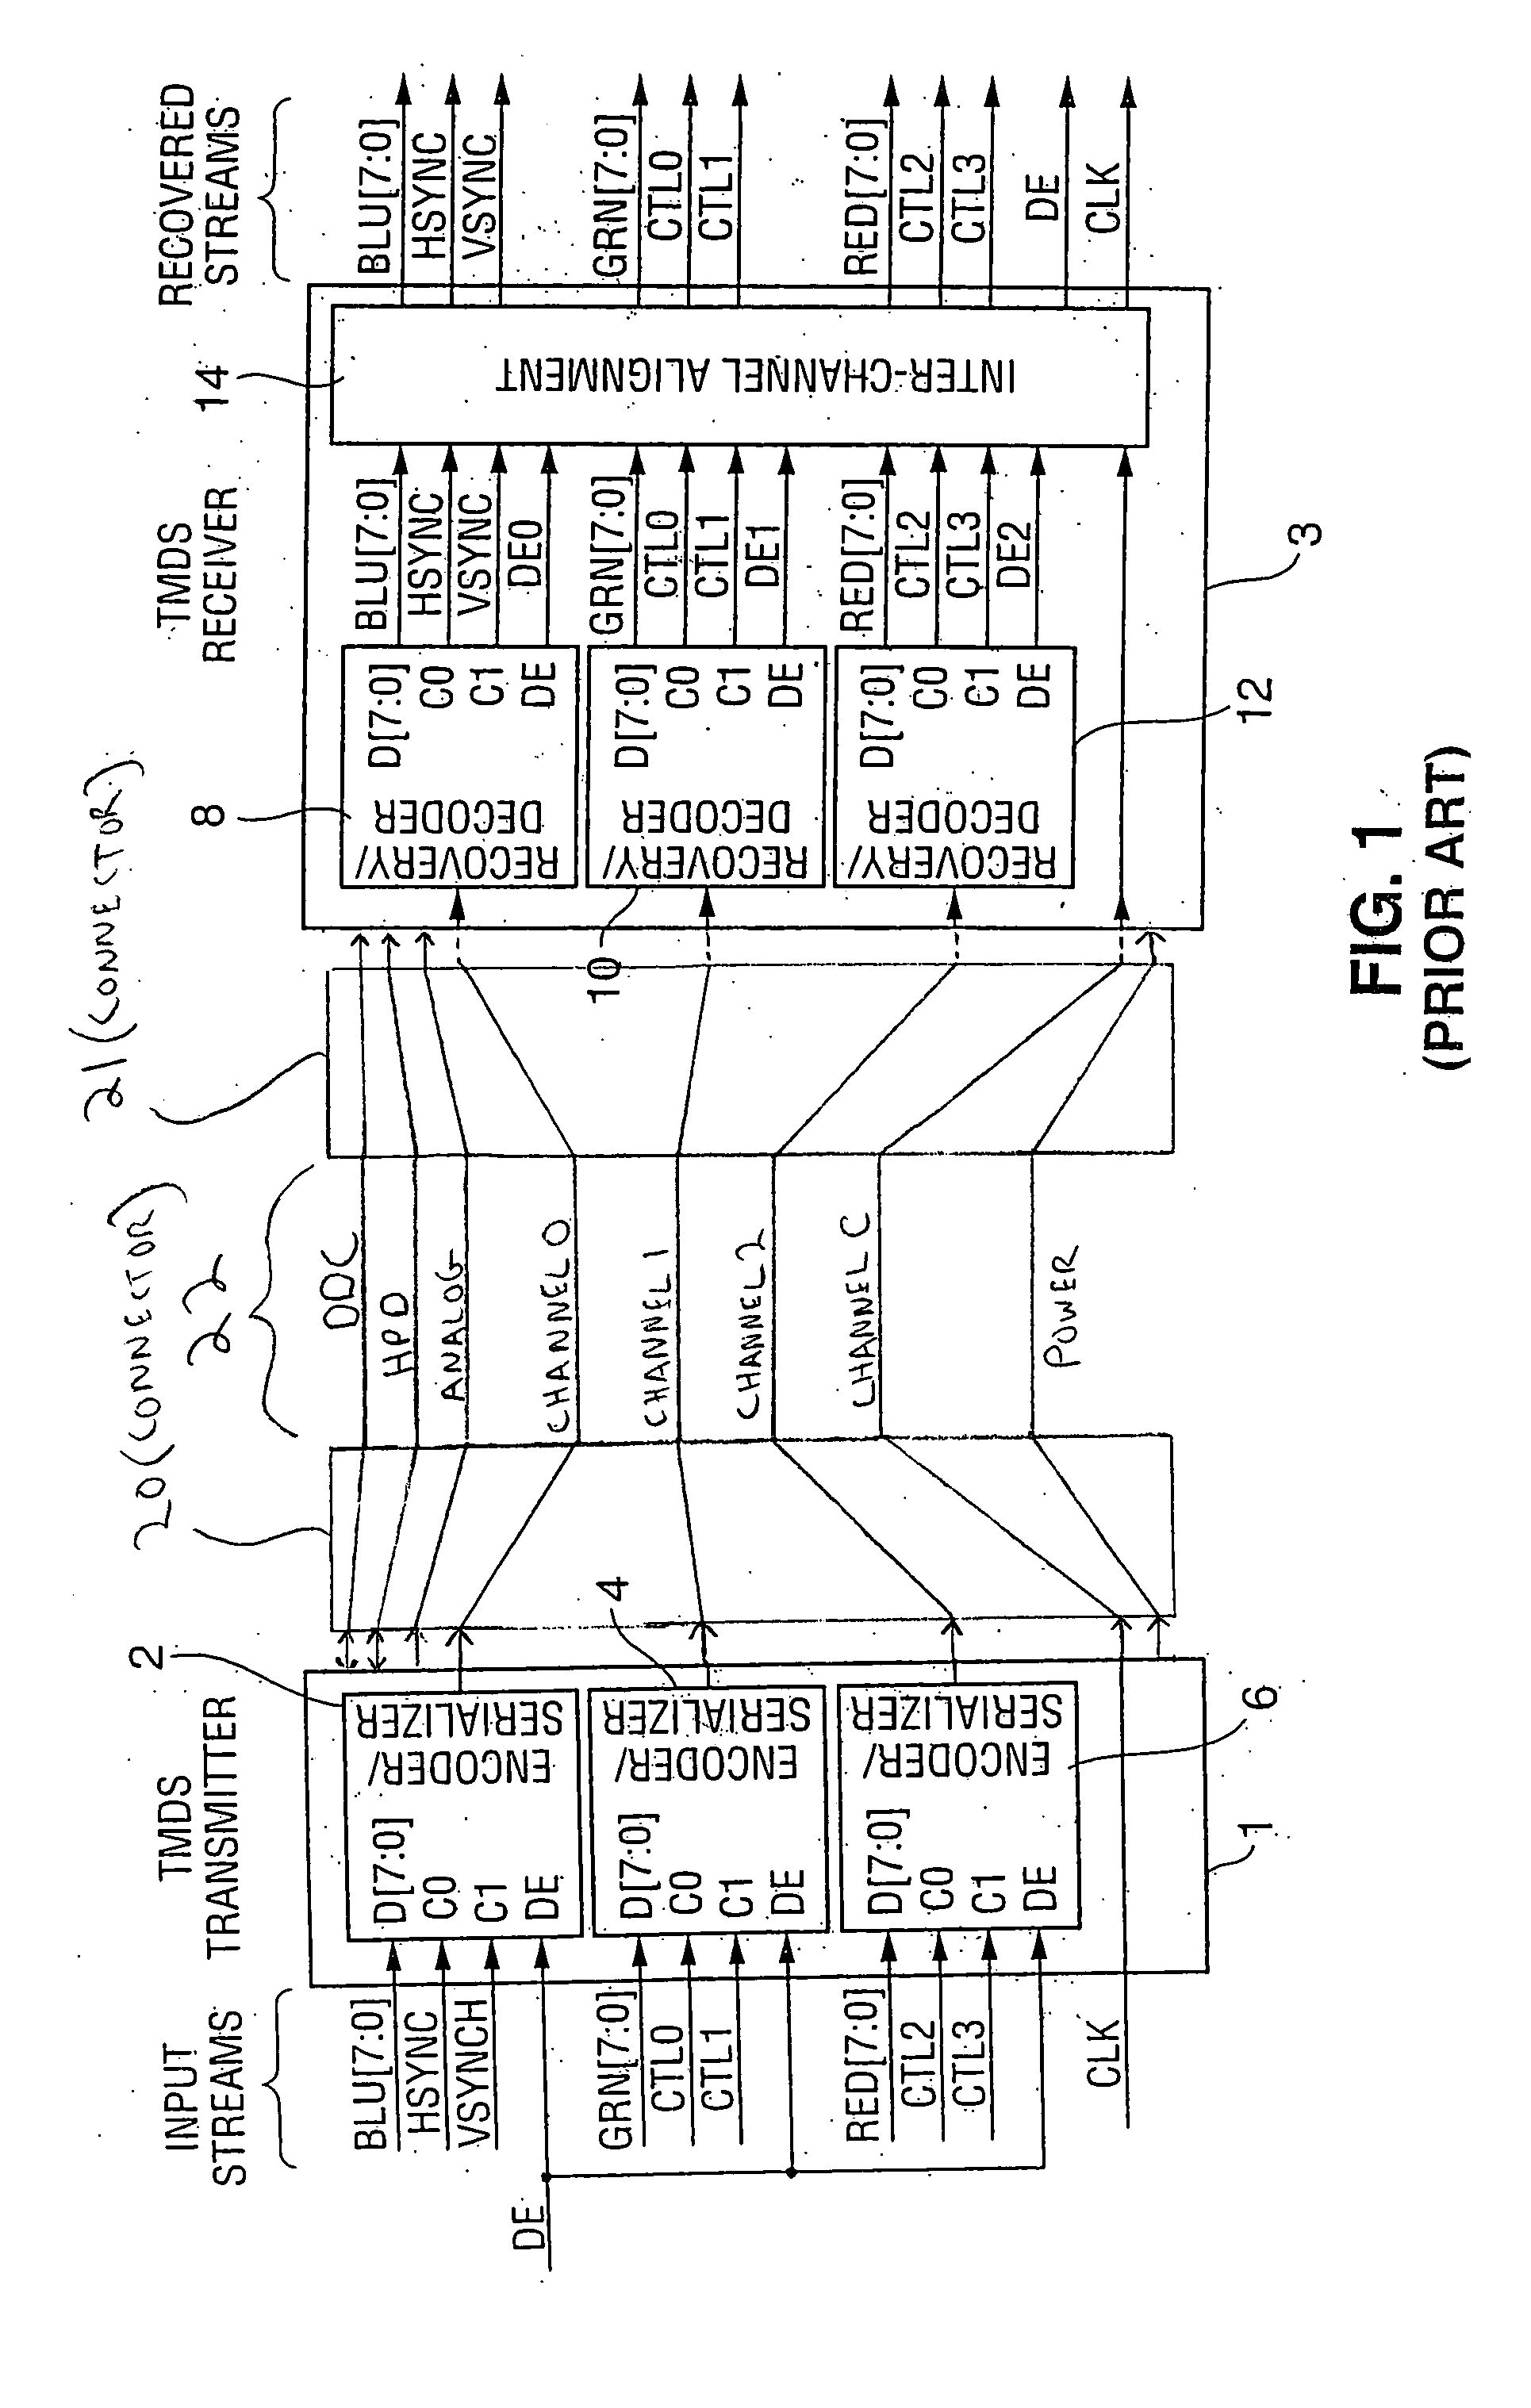 Method and circuit for adaptive equalization of multiple signals in response to a control signal generated from one of the equalized signals